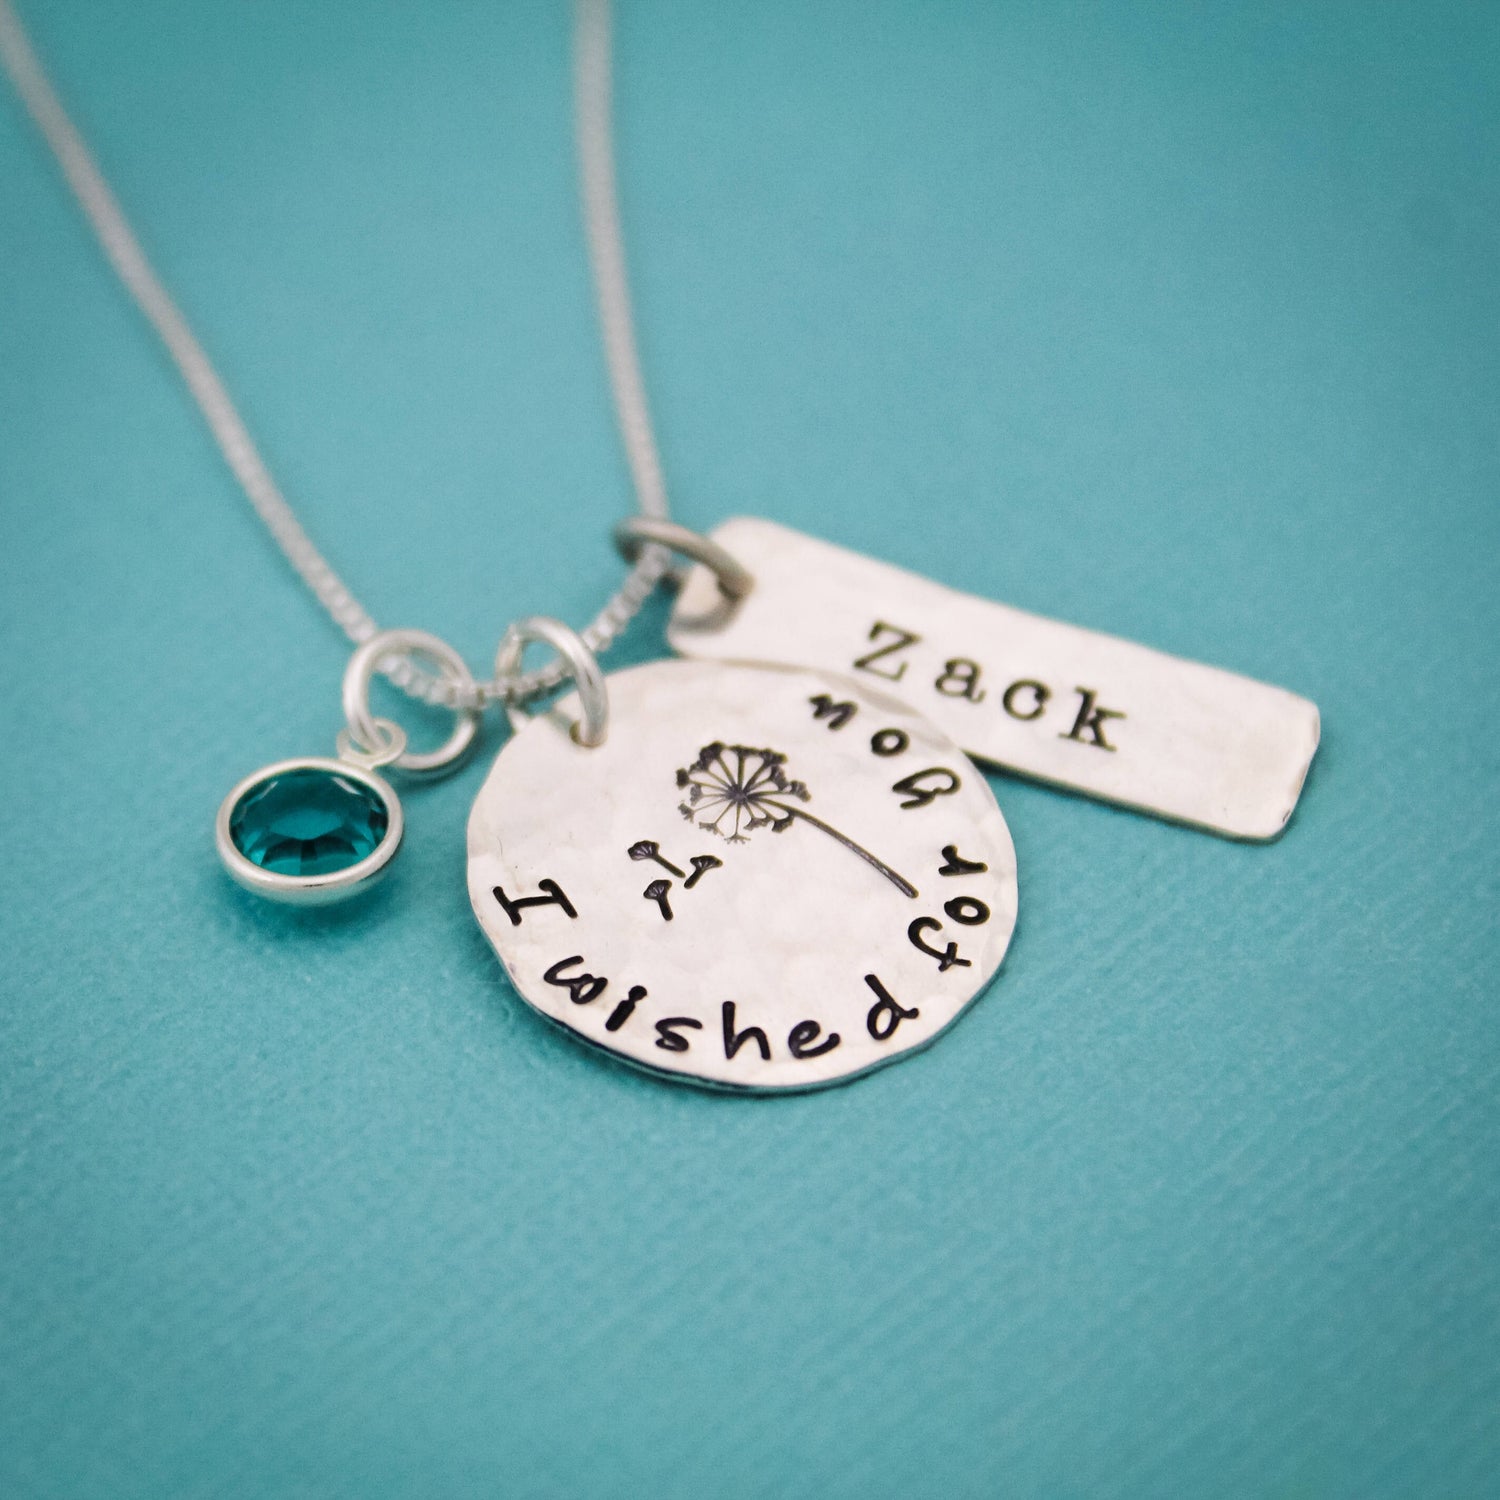 Personalized I Wished for You Necklace with Birthstone and Dandelion, Adoption Necklace, Adoption Gift, Adoption Jewelry, Hand Stamped